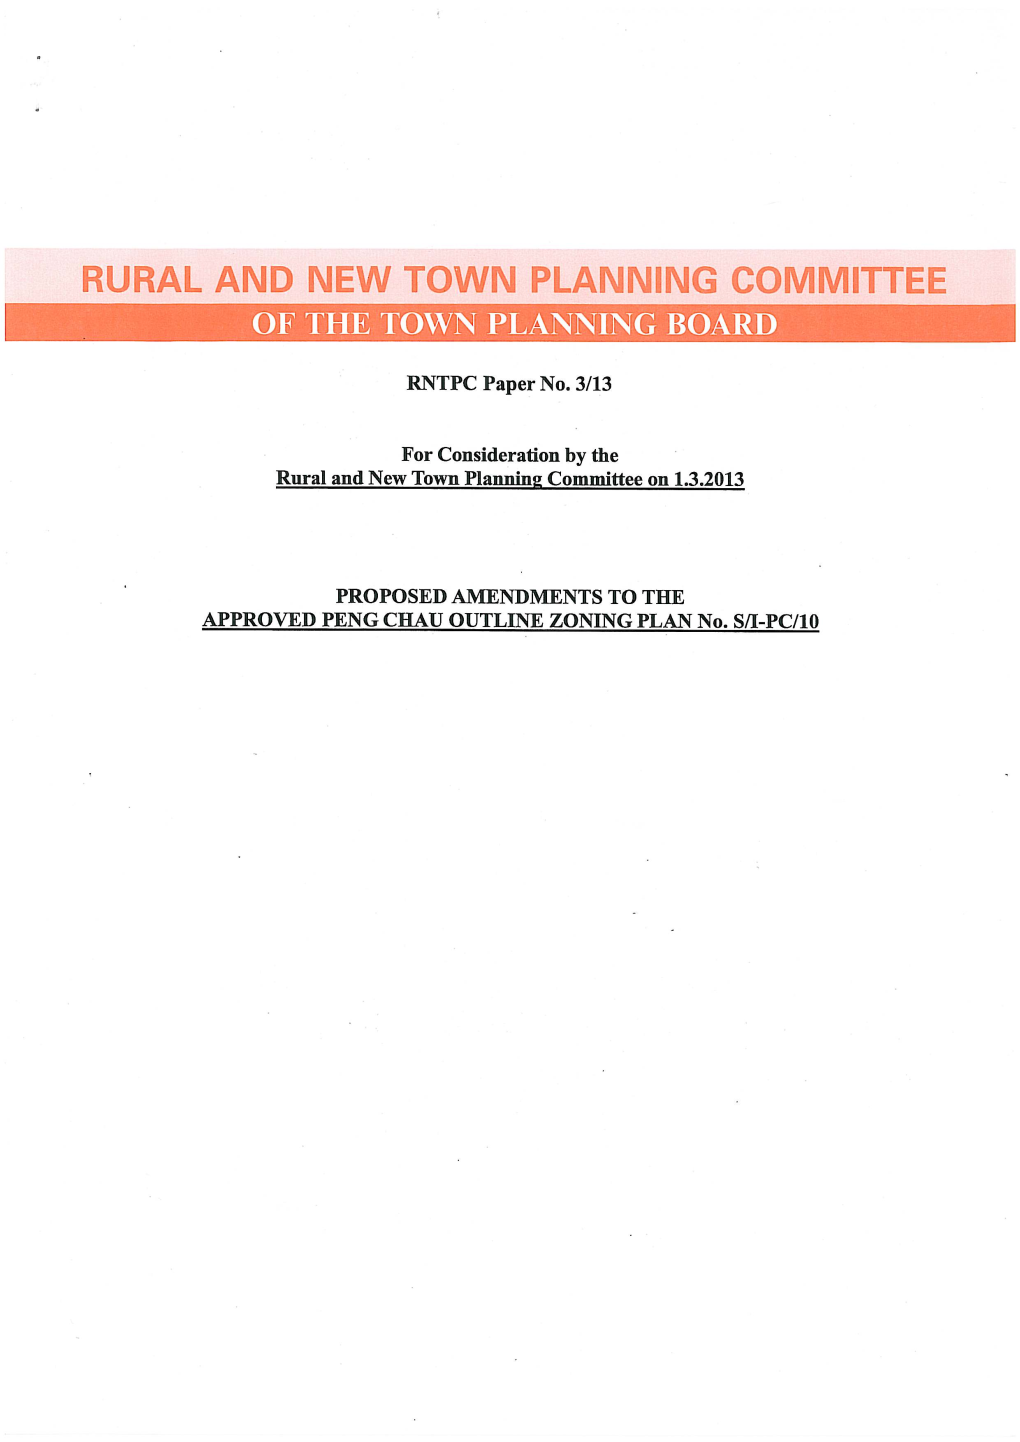 RNTPC Paper No. 3/13 for Consideration by the Rural and New Town Planning Committee on 1.3.2013